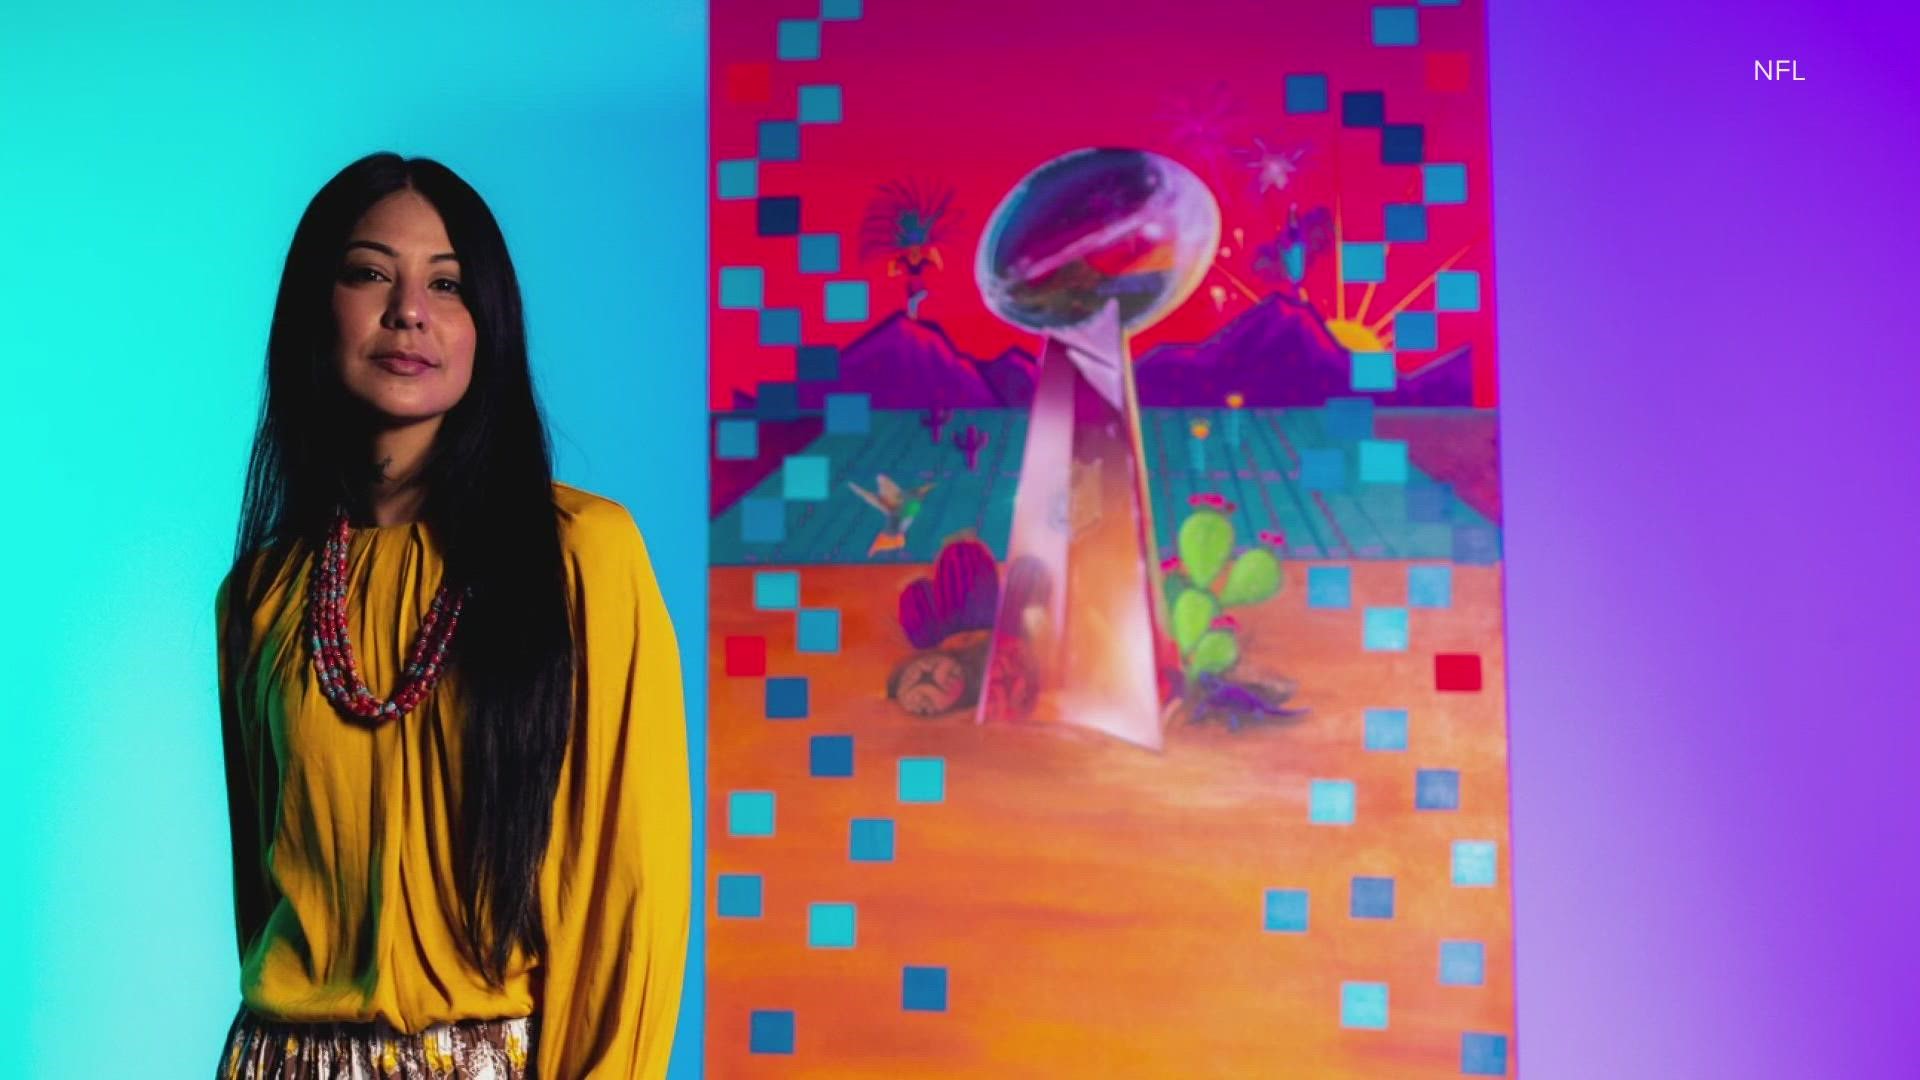 Lucinda “La Morena“ Hinojos' artwork will be featured on Super Bowl tickets, displays and more.